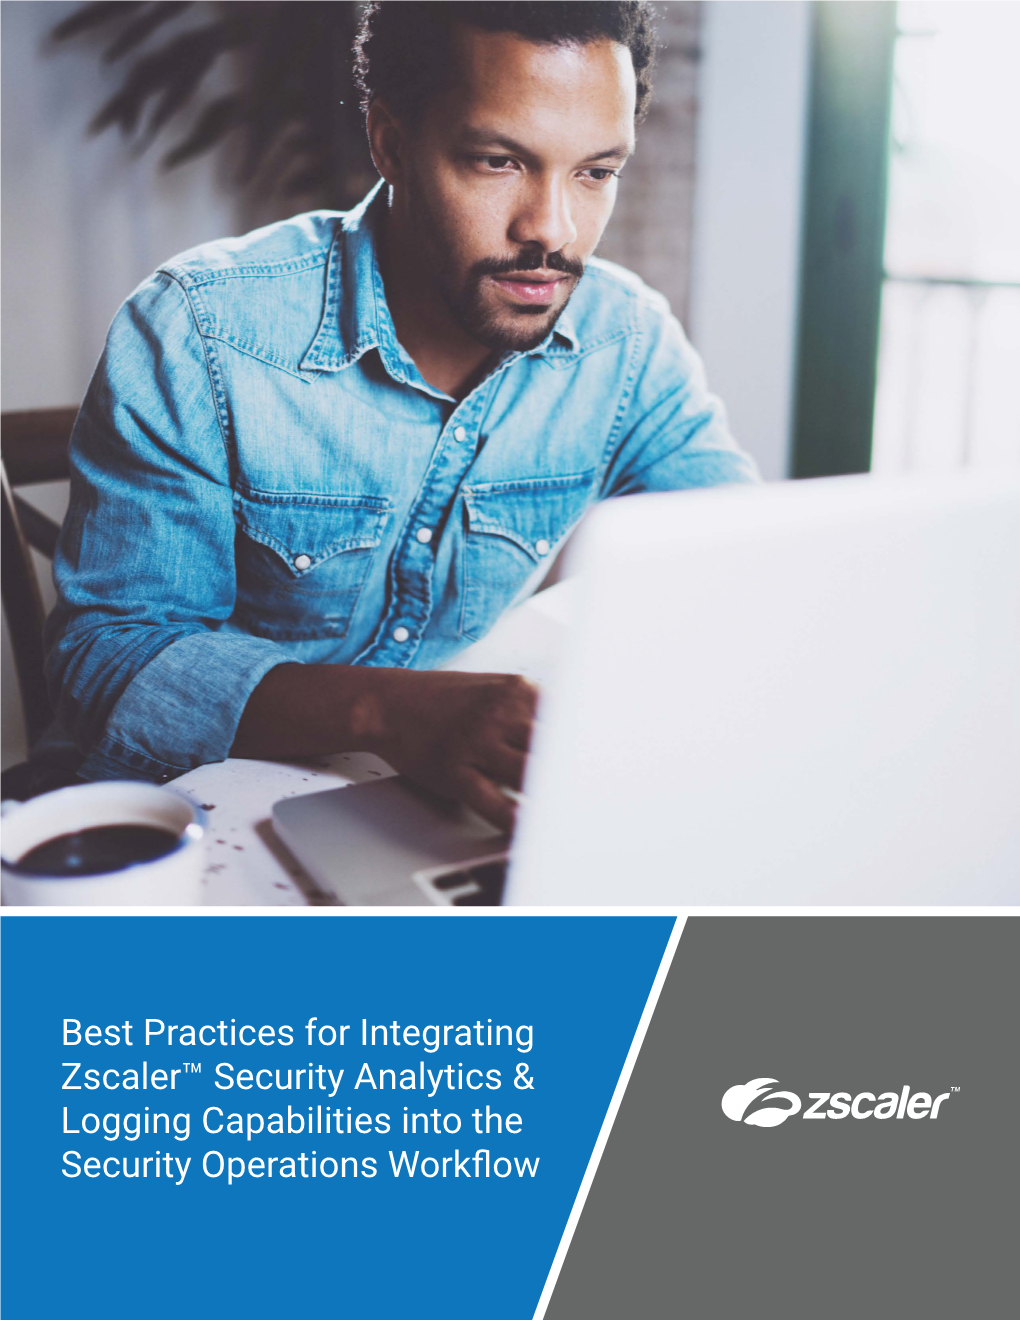 Best Practices for Integrating Zscaler Security Analytics